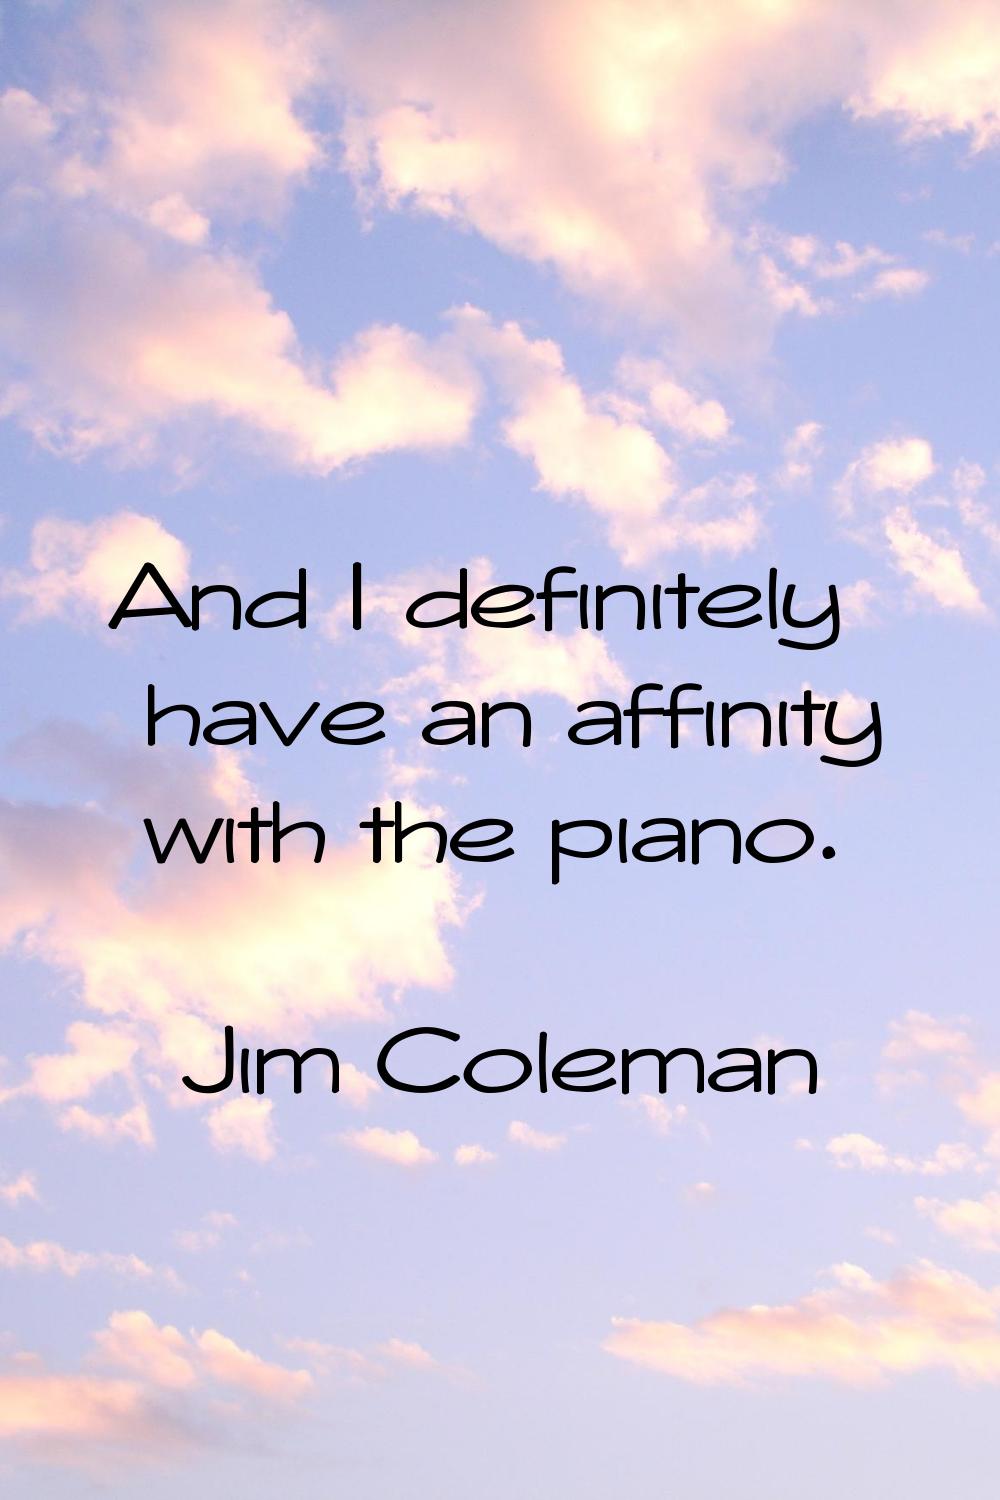 And I definitely have an affinity with the piano.